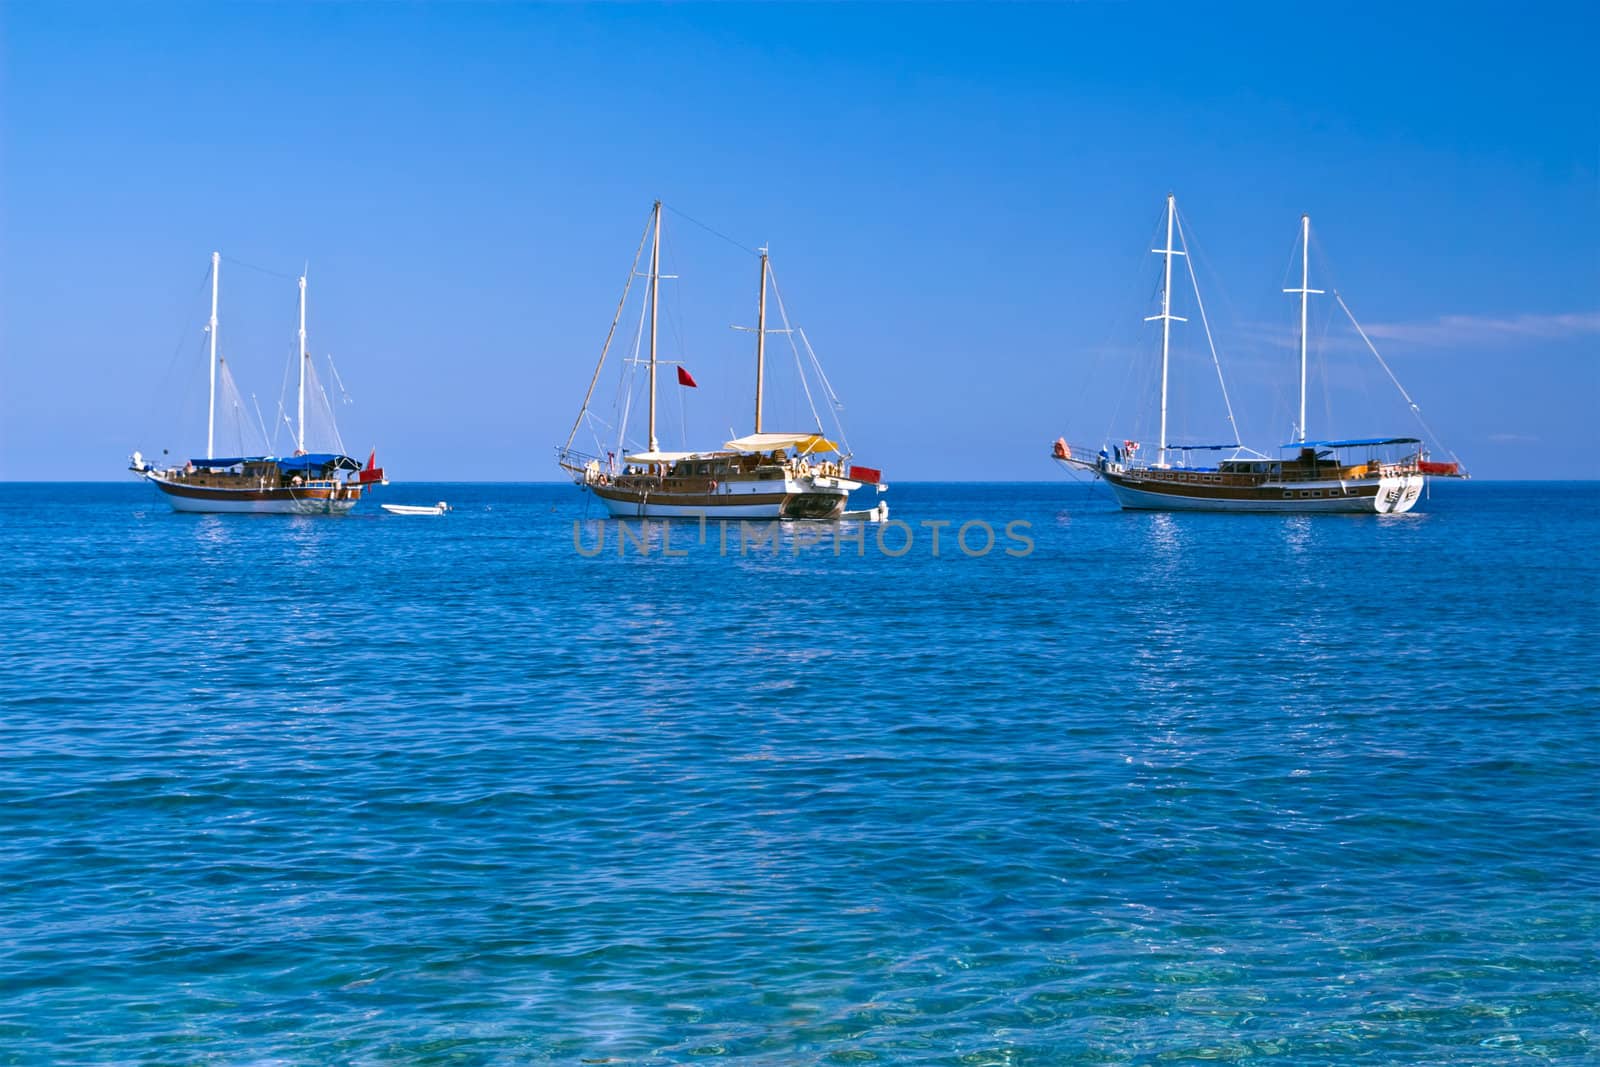 Three sailboats with lowered sails in sunny weather, with copyspace